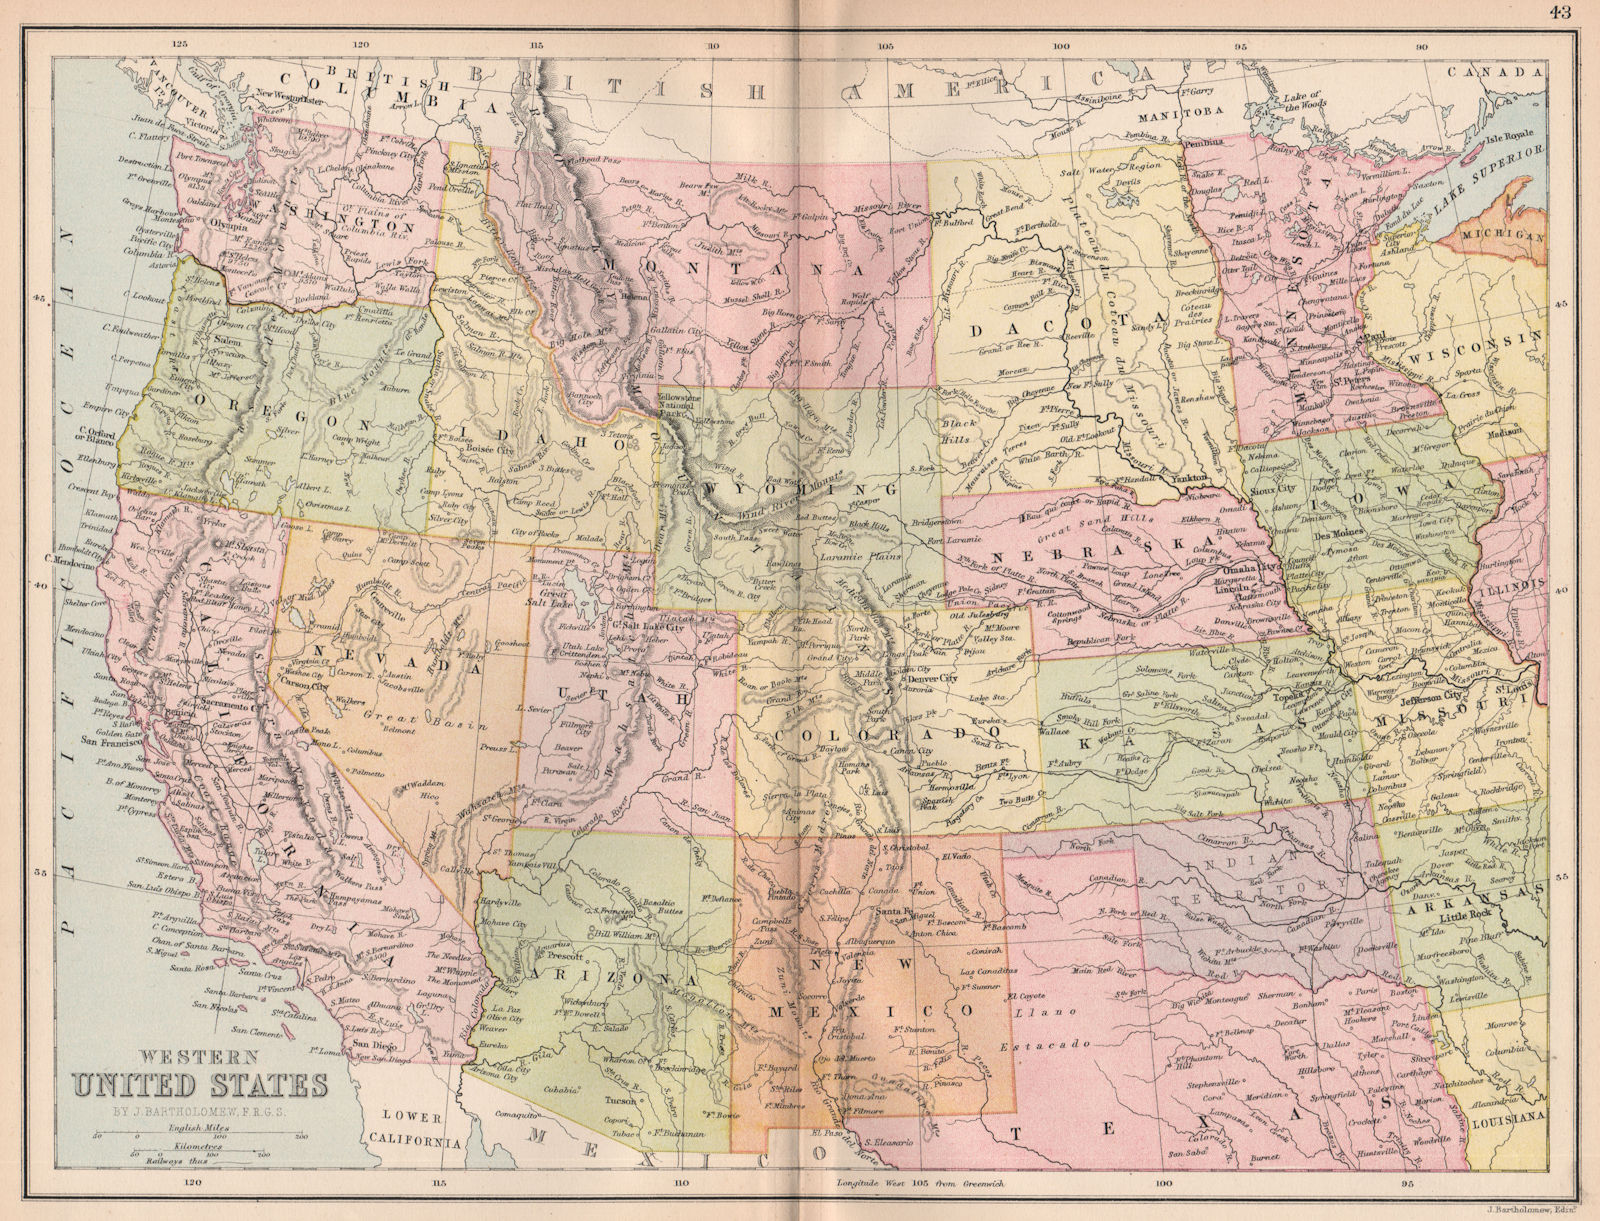 WESTERN USA. Pacific/Mountain states.Unified 'Dacota'.Indian territory 1878 map